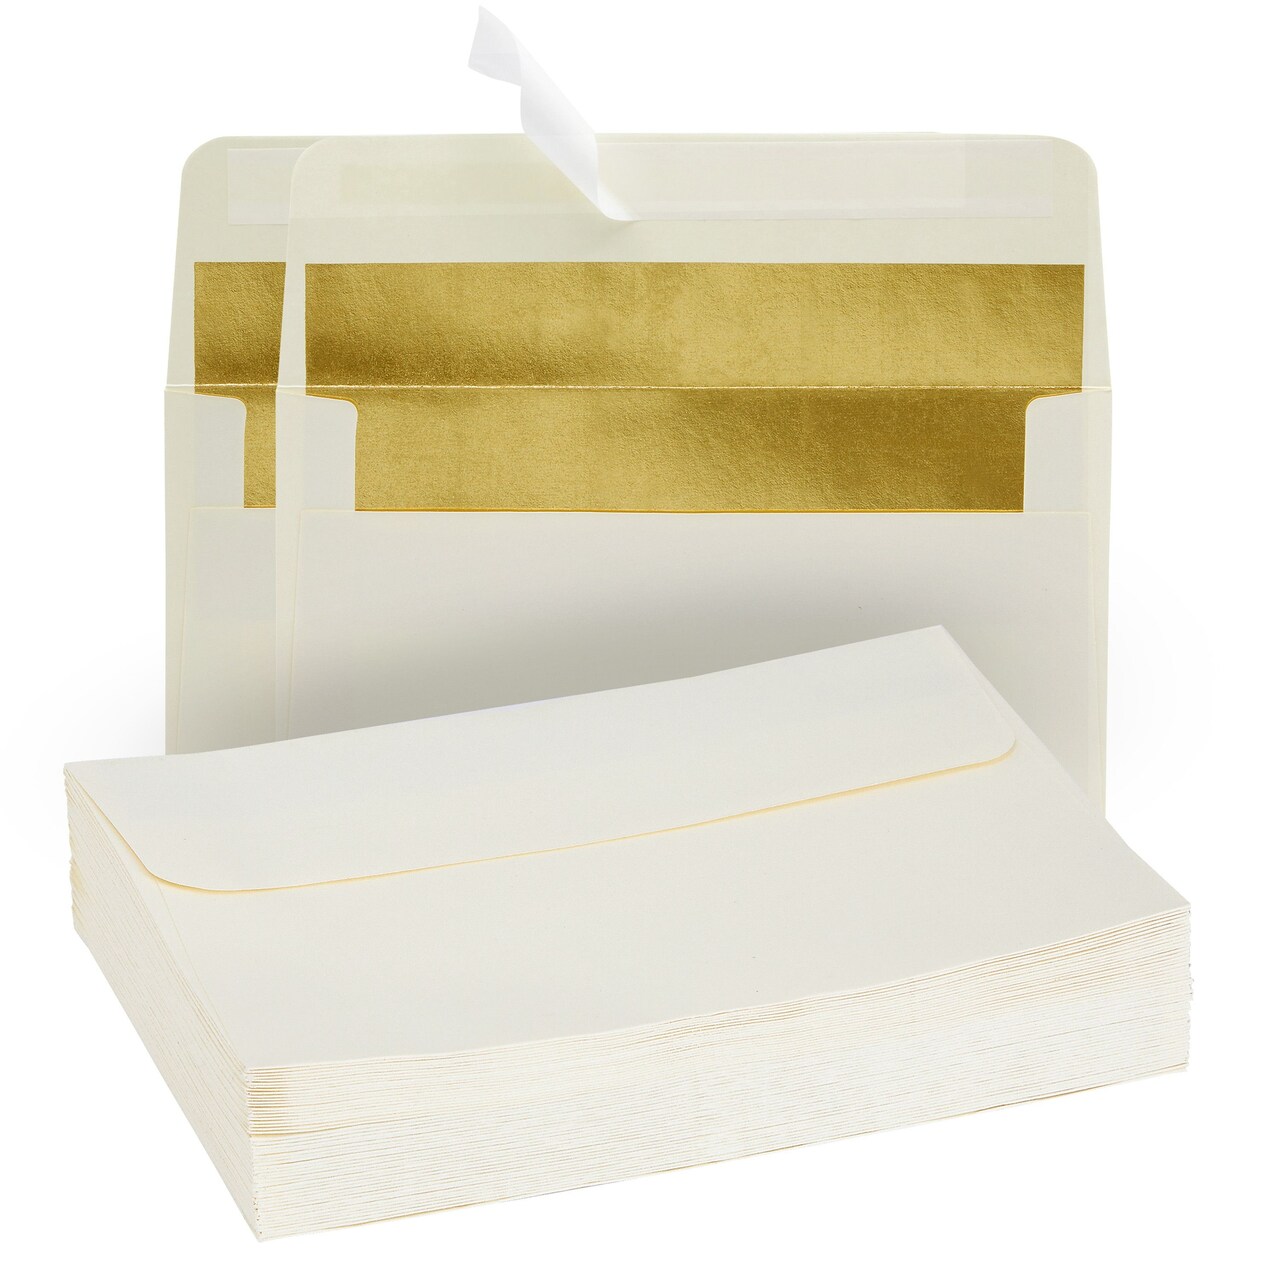 50 Pack Ivory and Gold Envelopes 4x6, A6 Size for Wedding and Party  Invitations (Self Adhesive Peel-and-Stick)